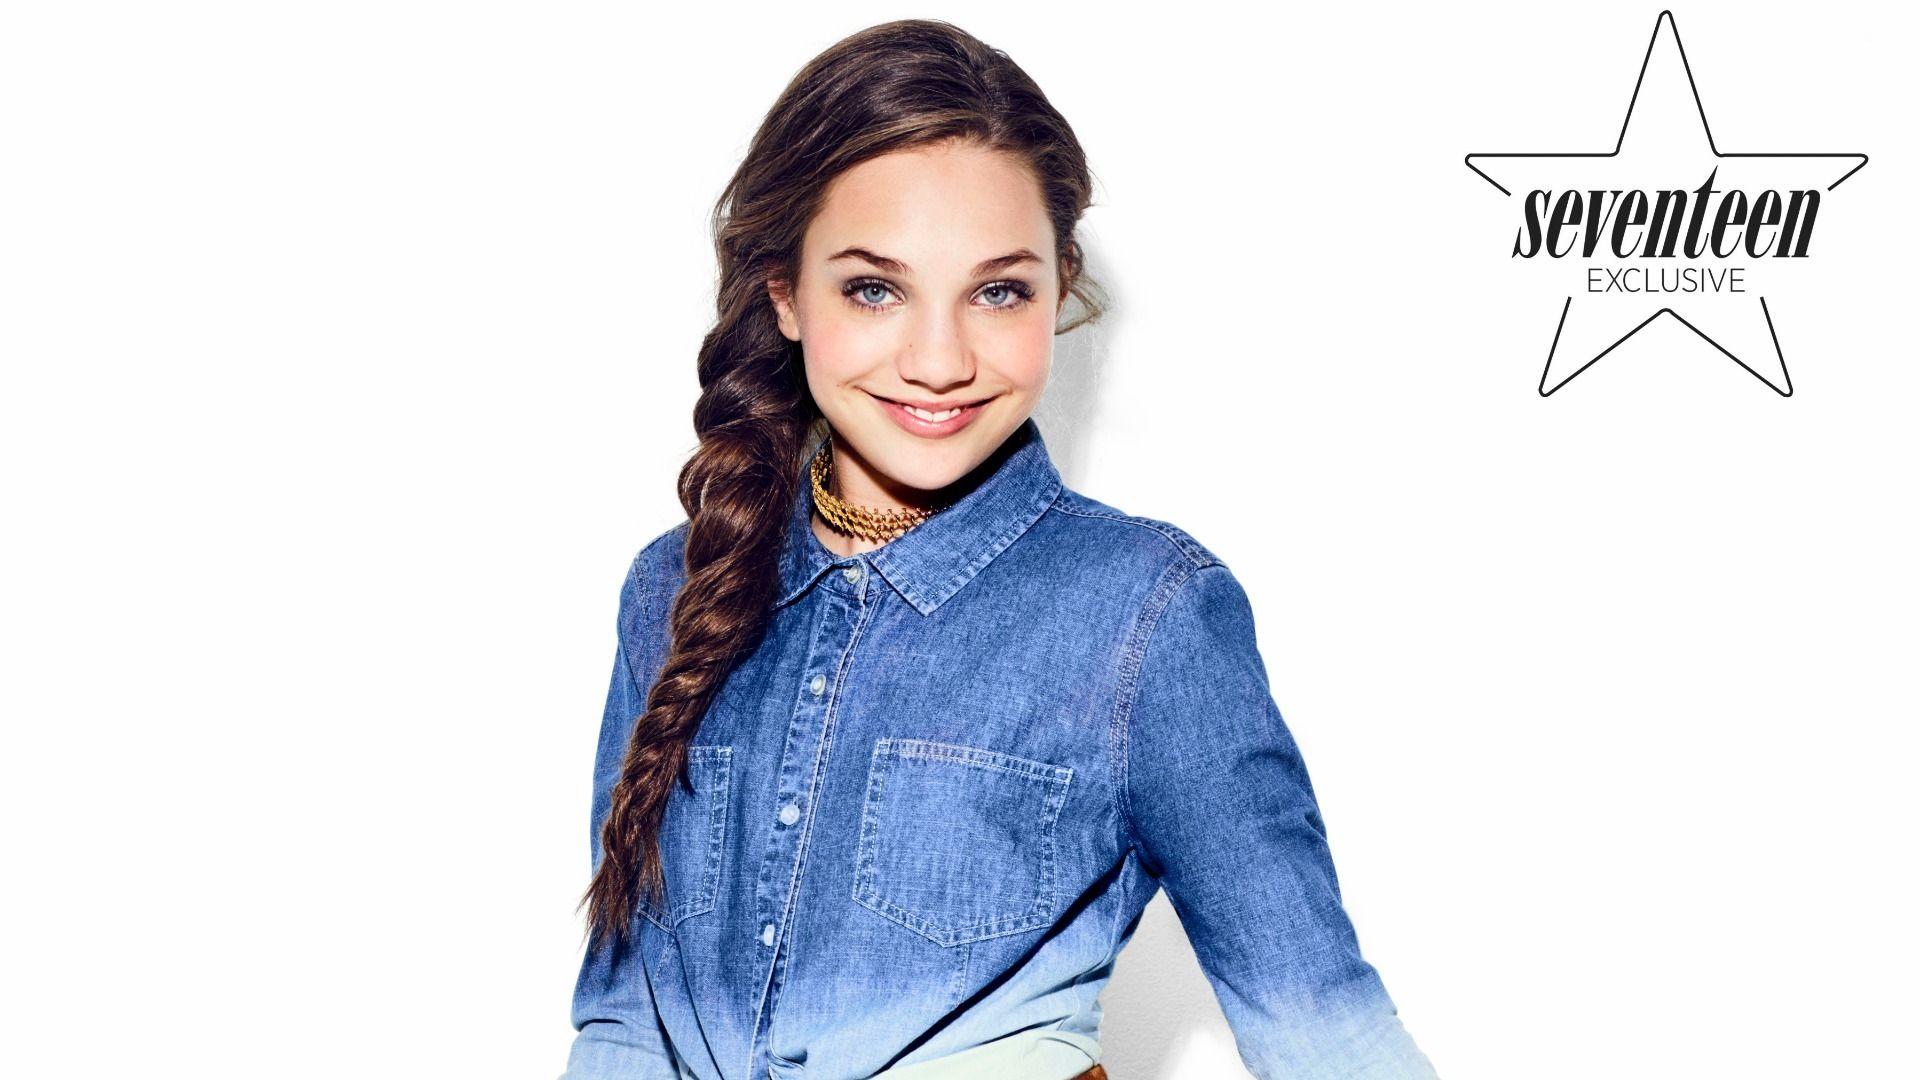 Leaving Dance Moms wasn't easy for Maddie Ziegler, but it was